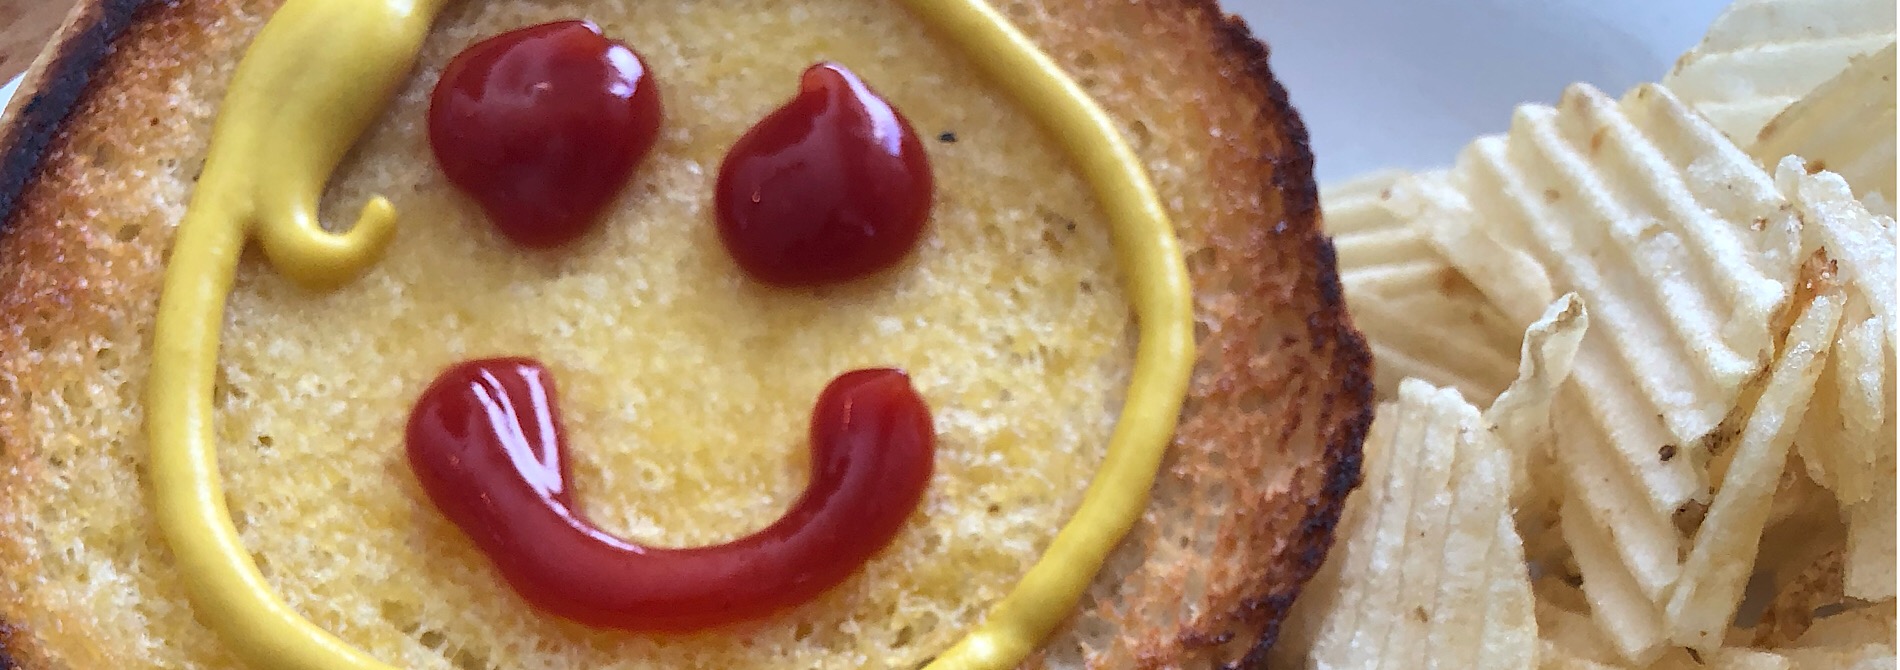 burger with happy face made from ketchup and mustard